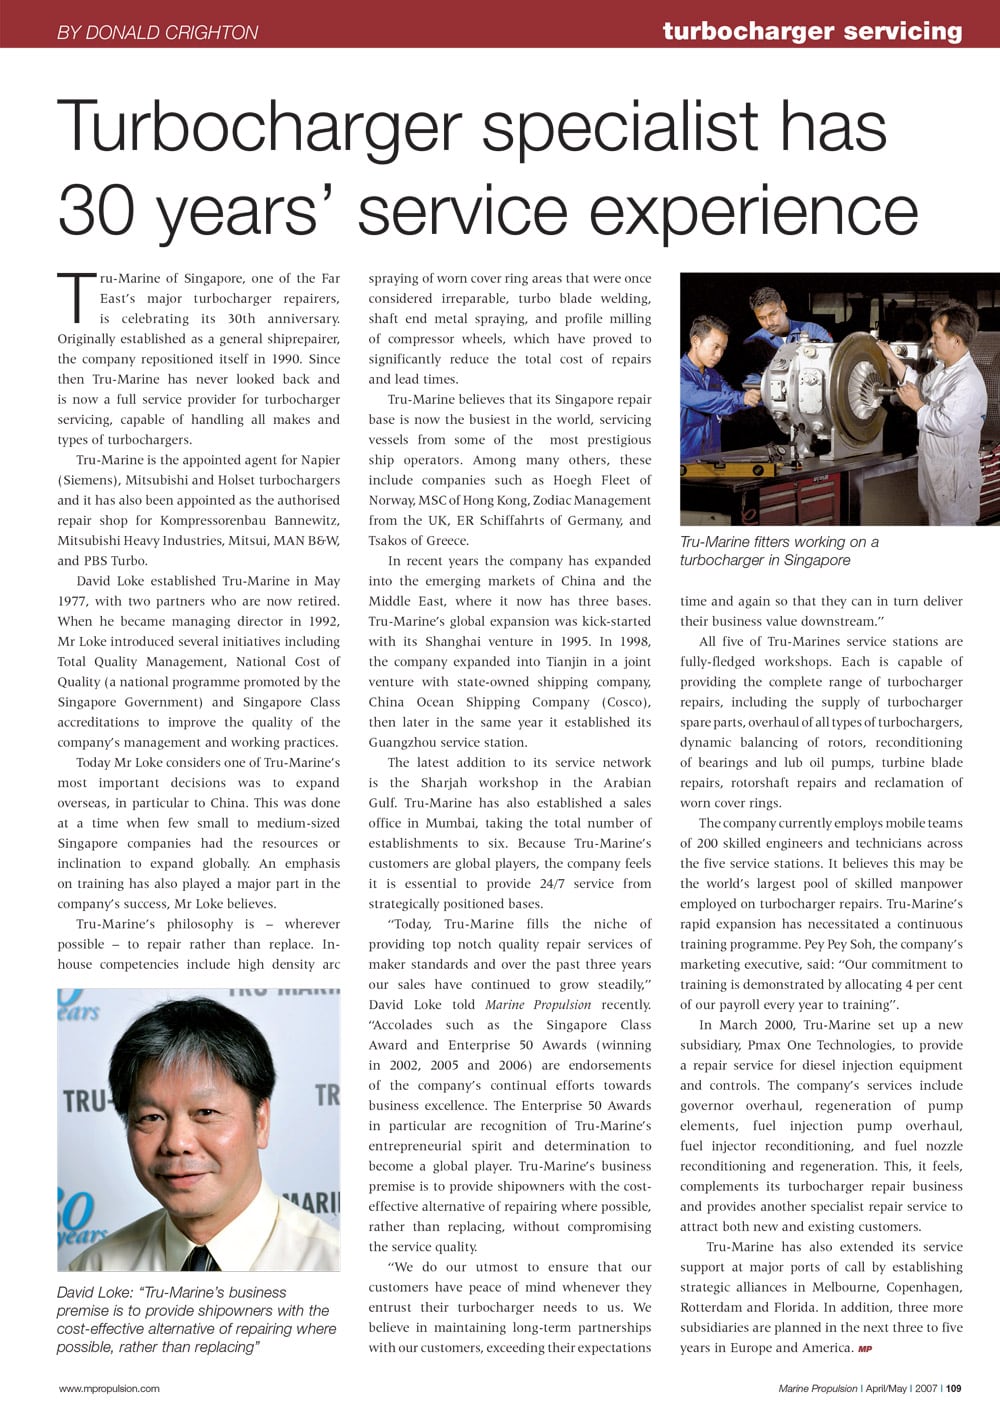 Turbocharger specialist has 30 years' service experience